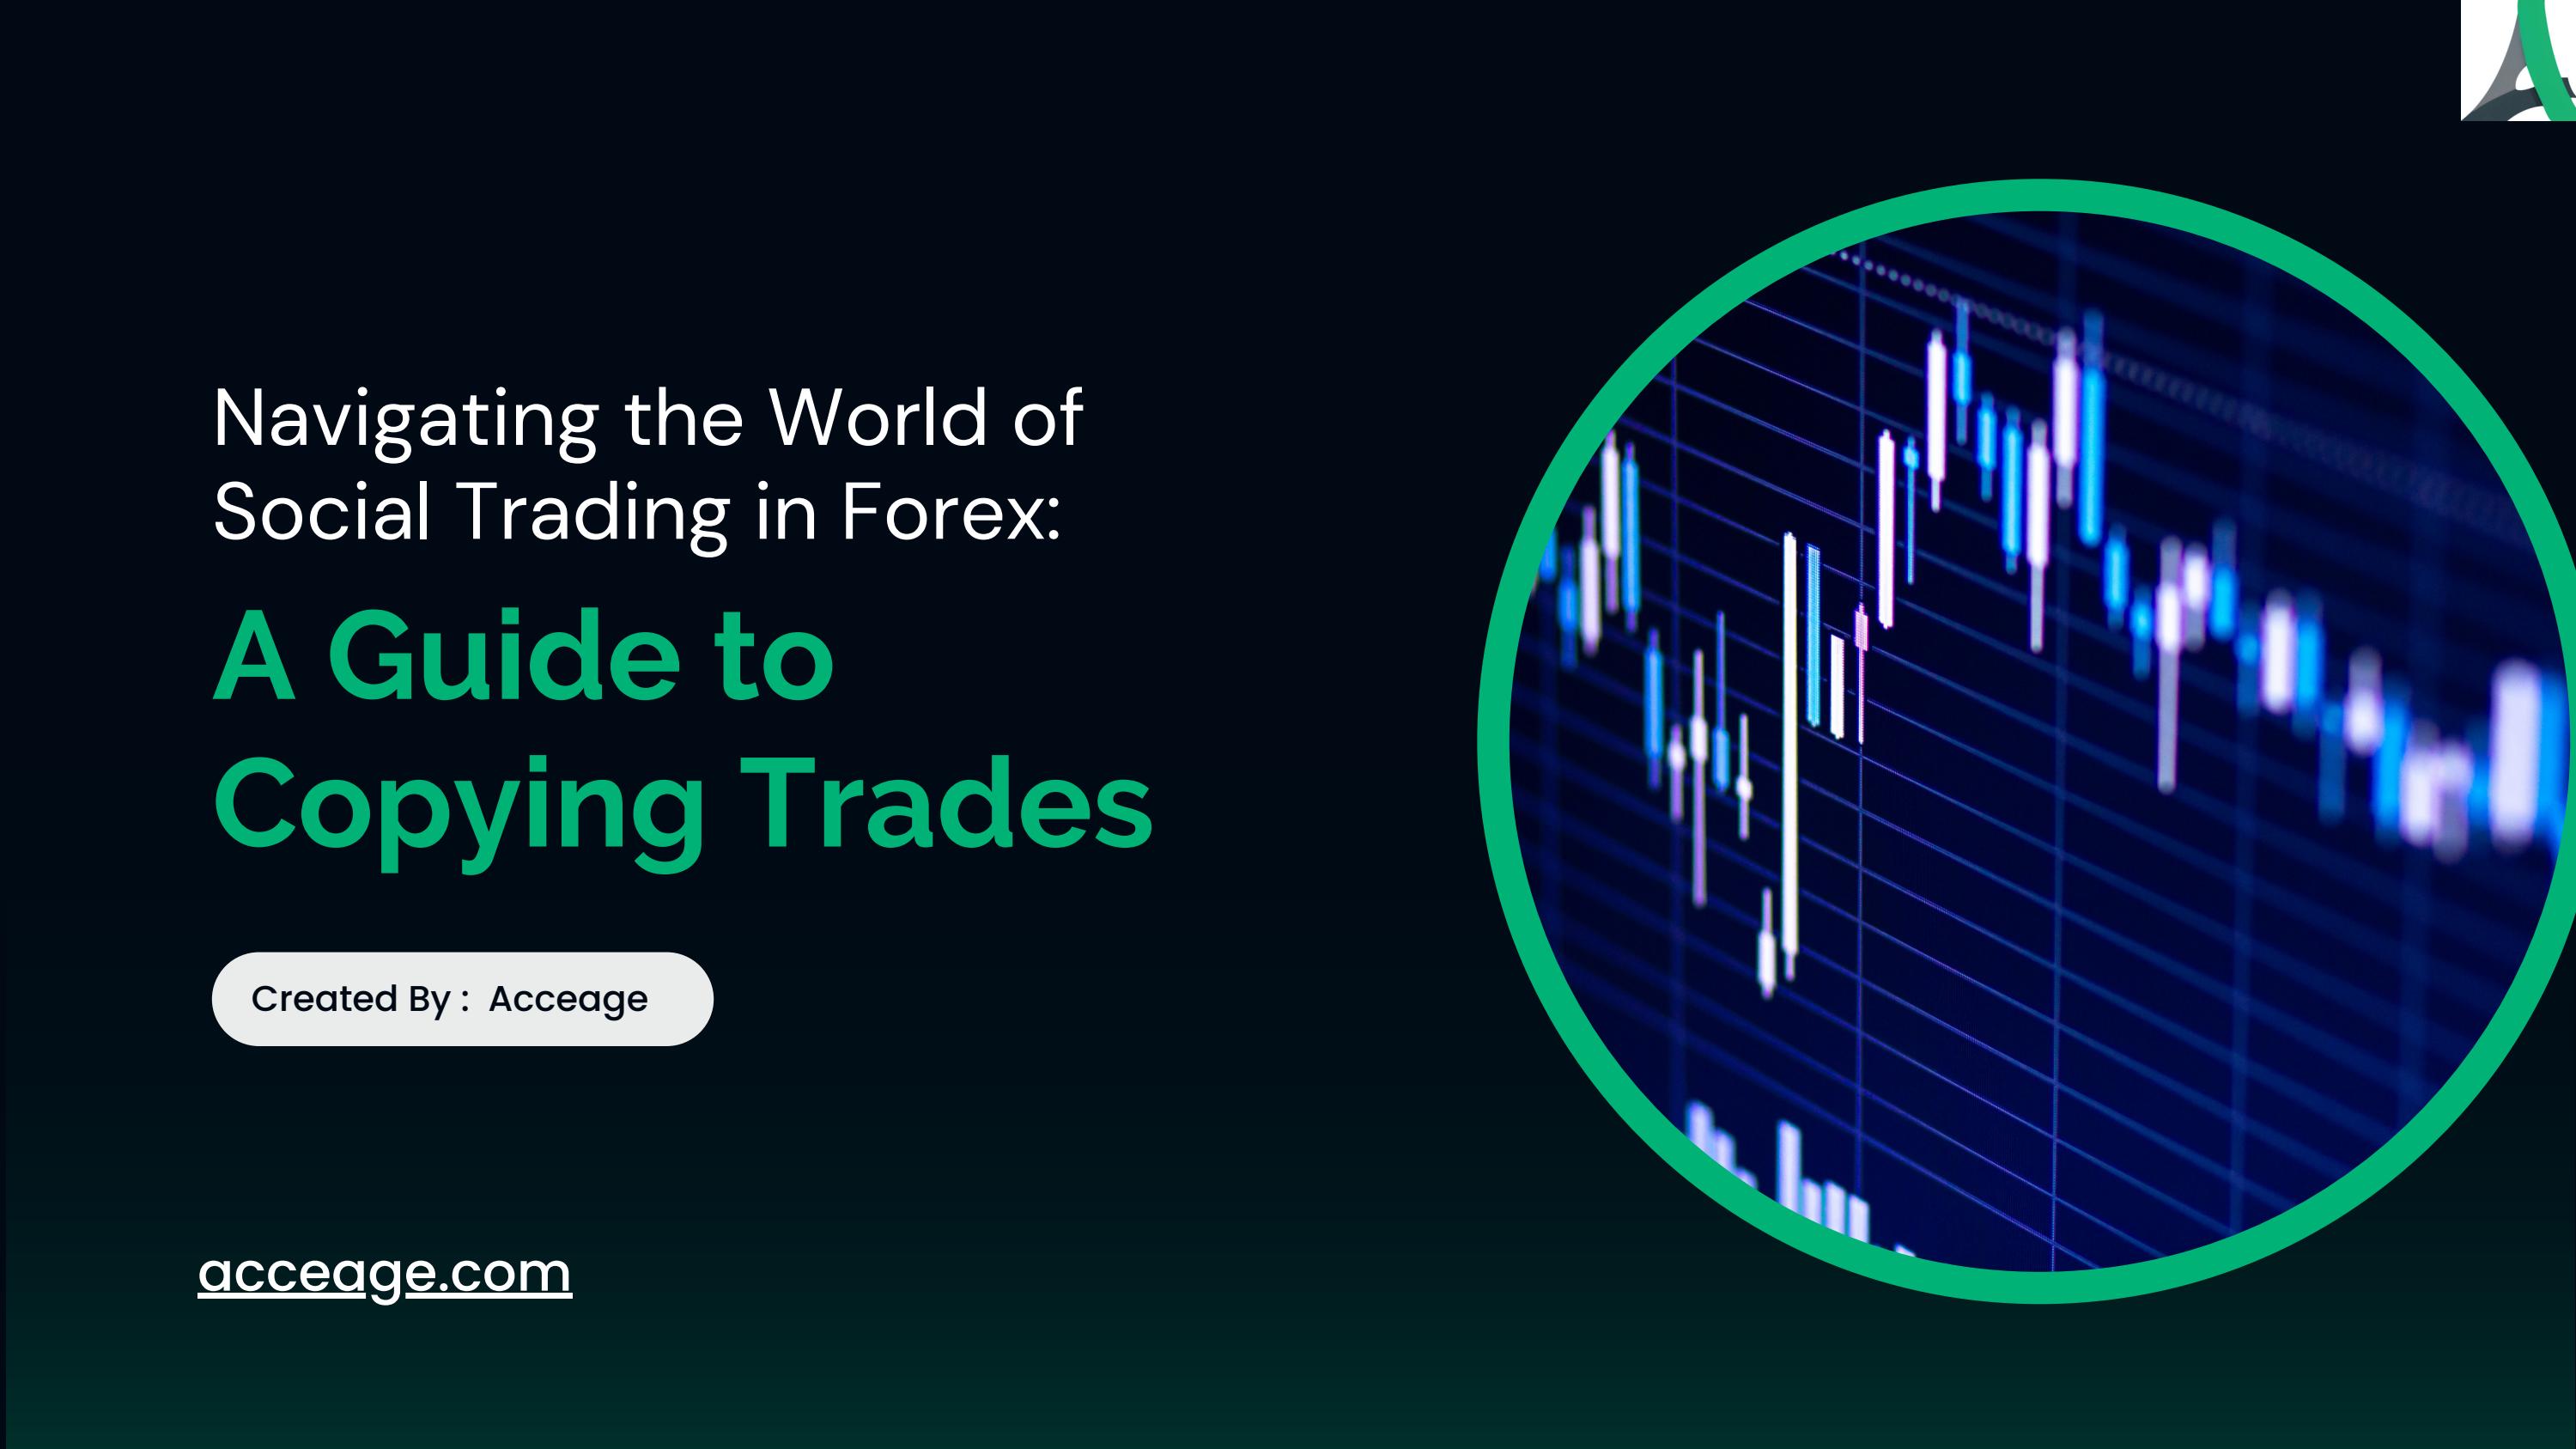 Navigating the World of Social Trading in Forex: A Guide to Copying Trades